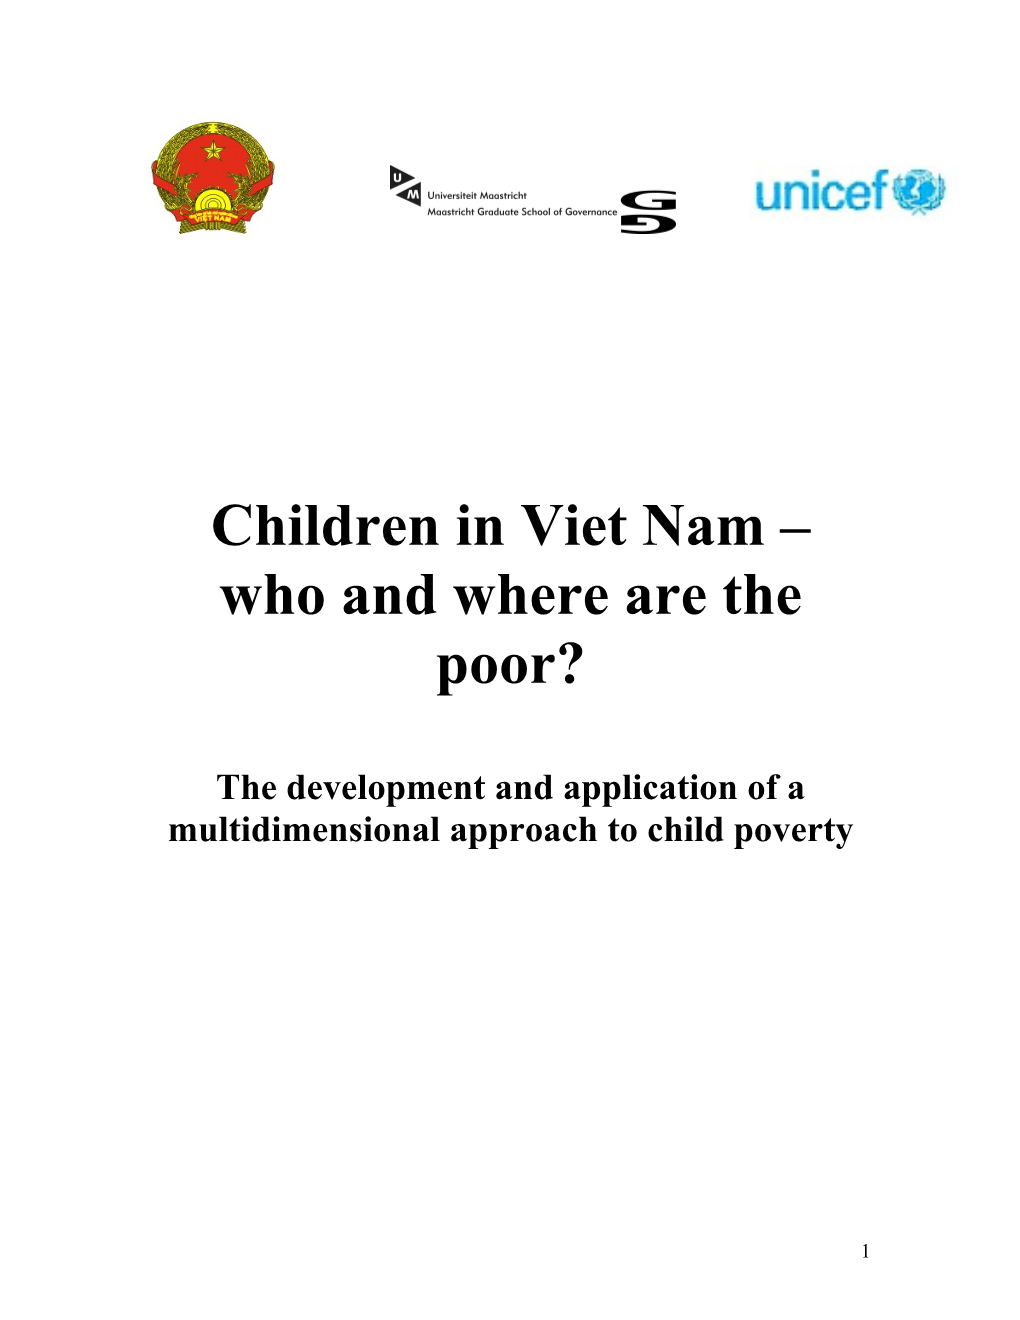 Children in Viet Nam Who and Where Are the Poor?